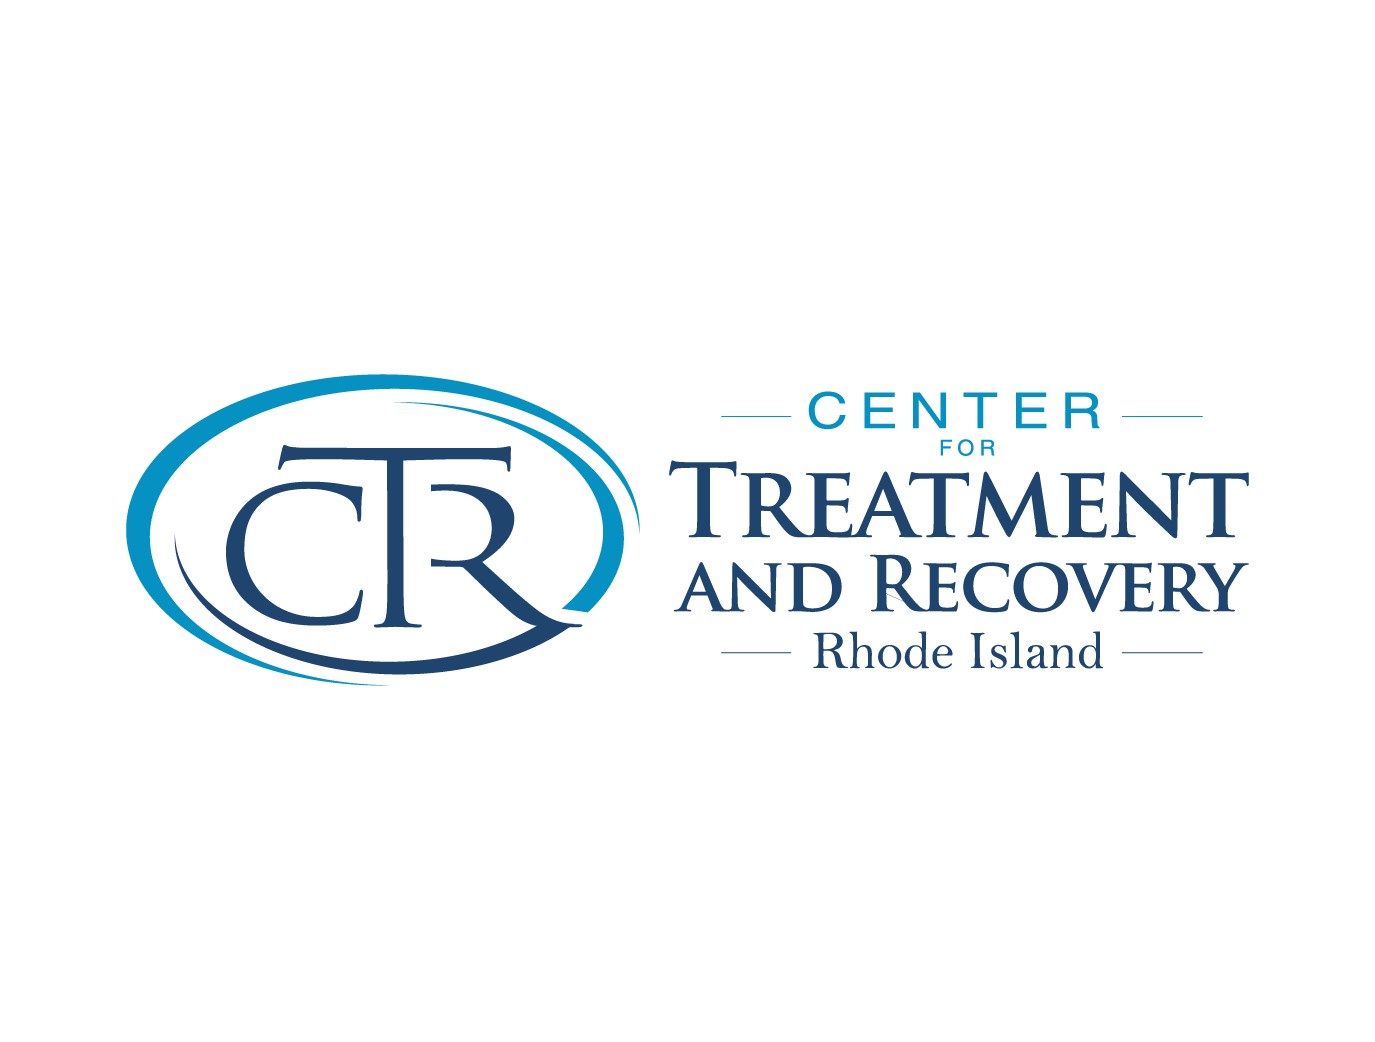 Center for Treatment and Recovery Pawtucket RI